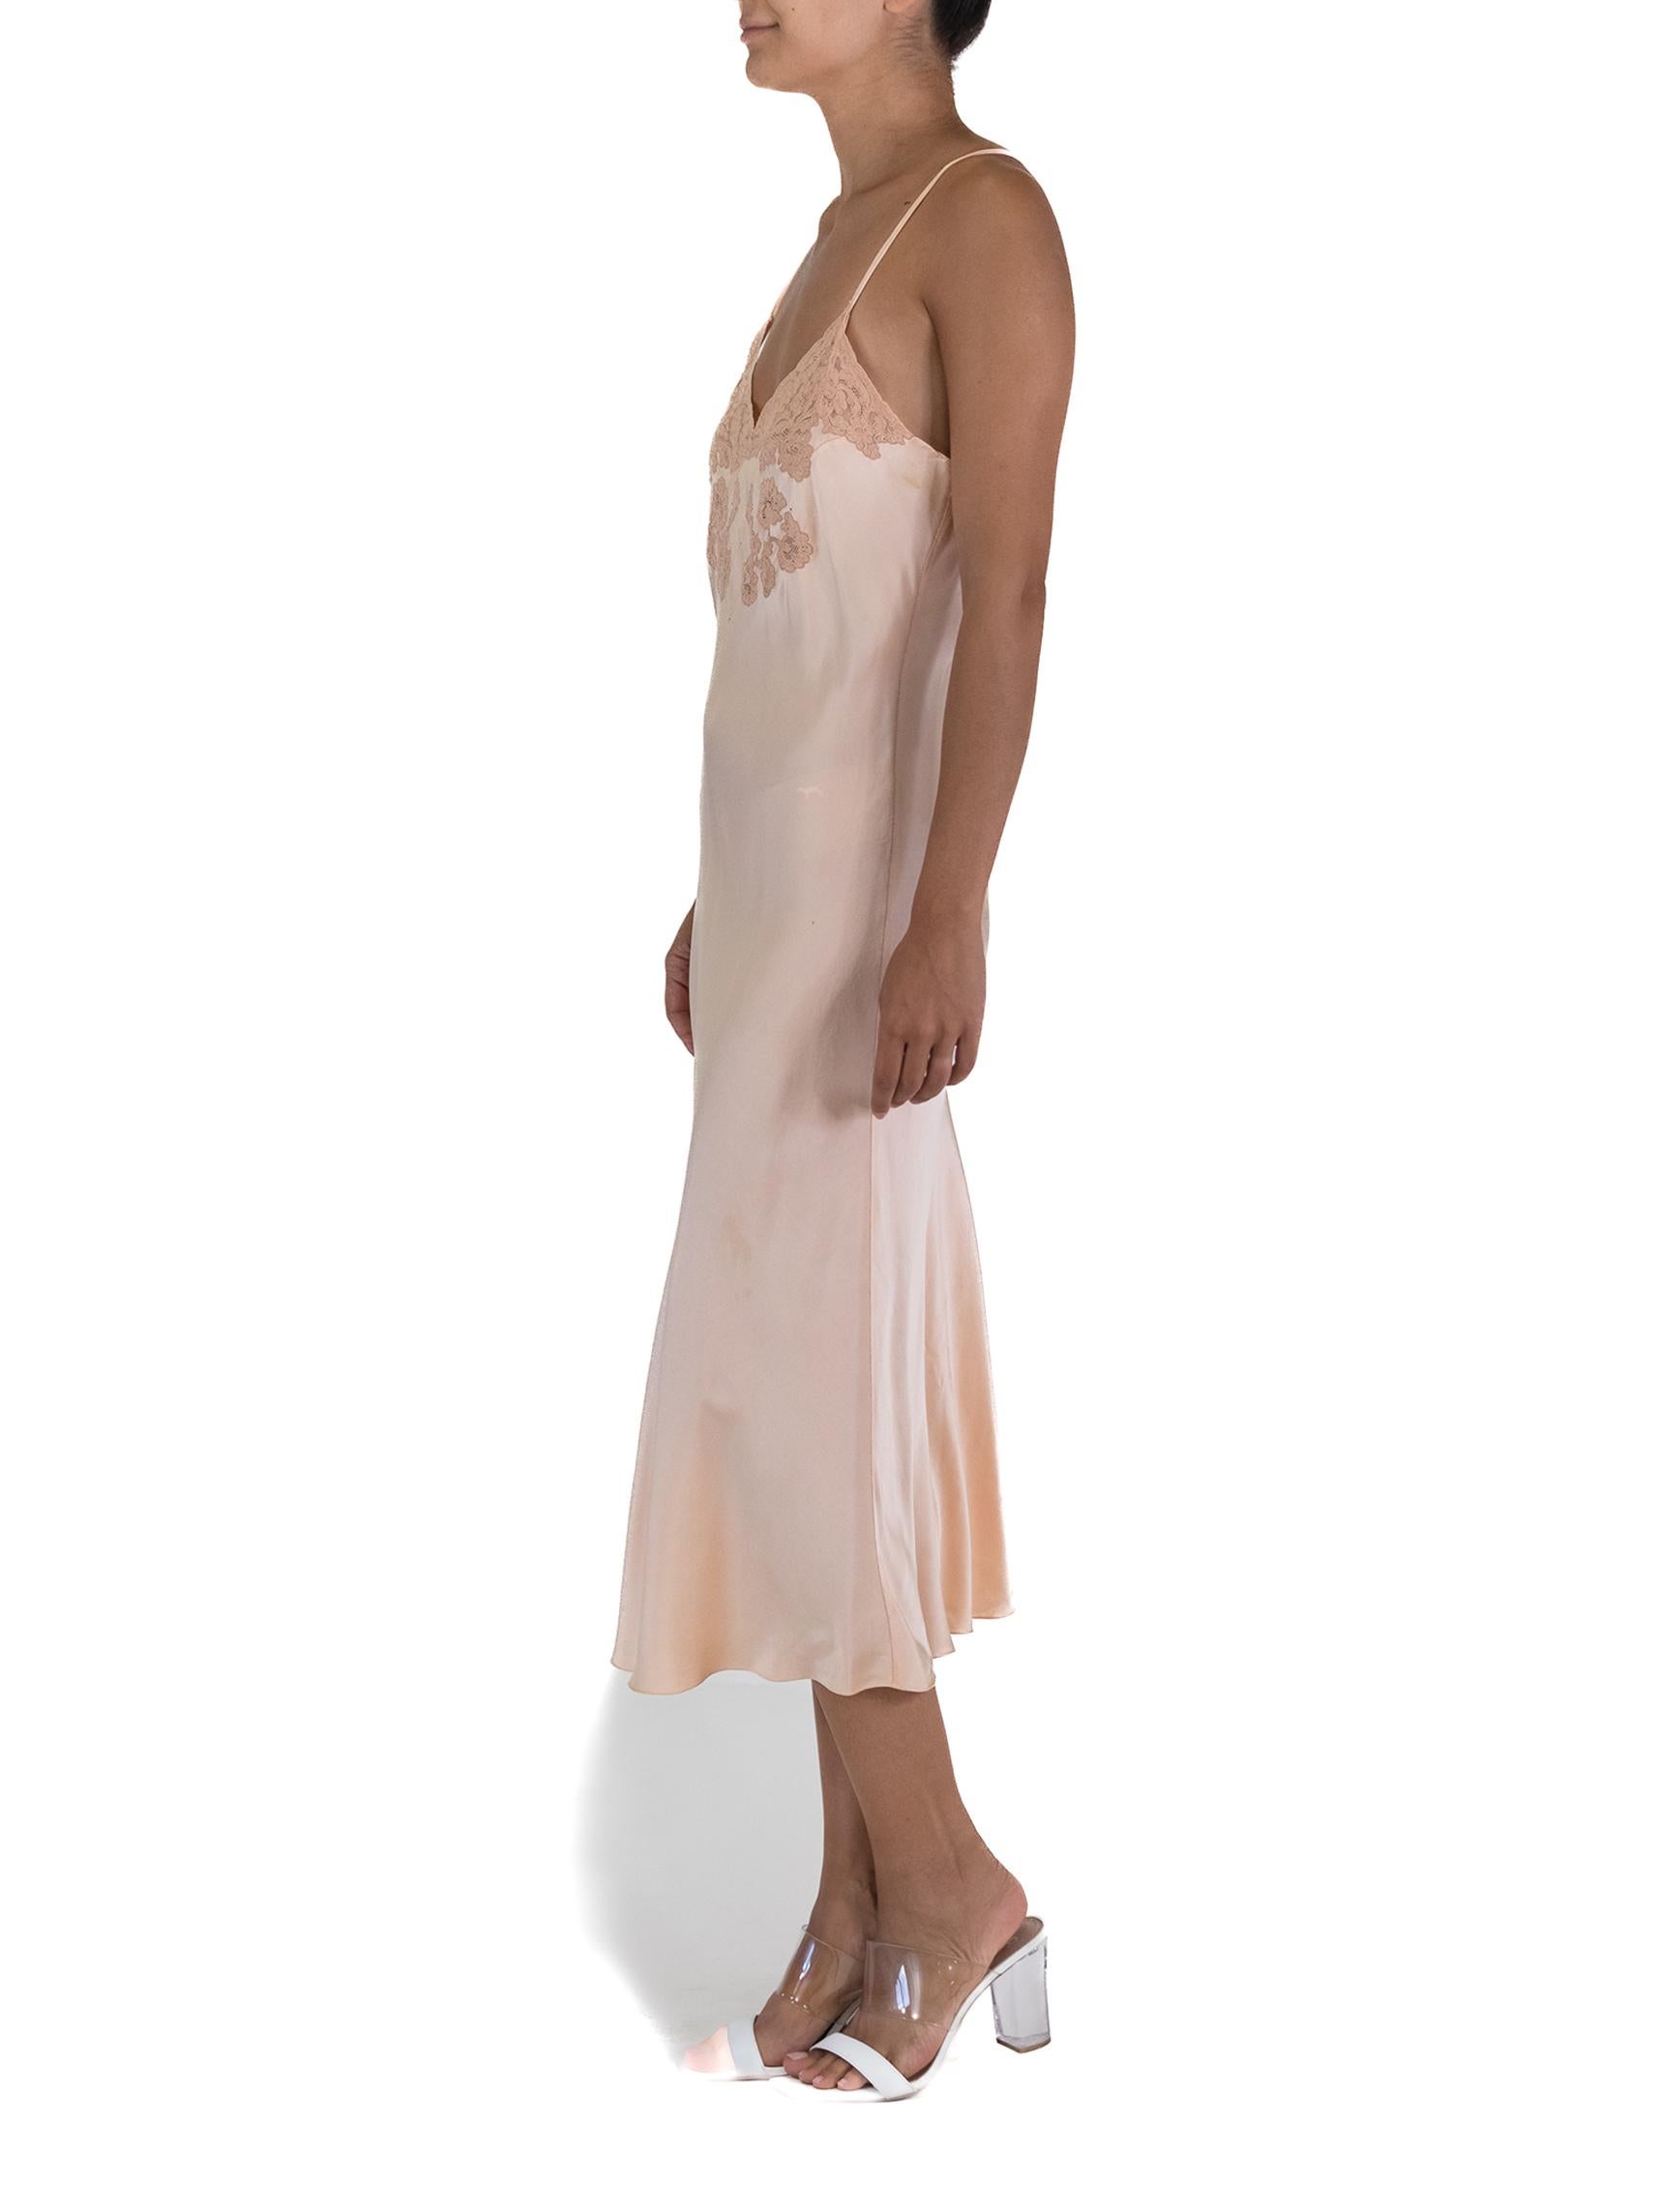 Beige 1940S Bontell Peach Silk Slip All Handmade With Lace Detail For Sale